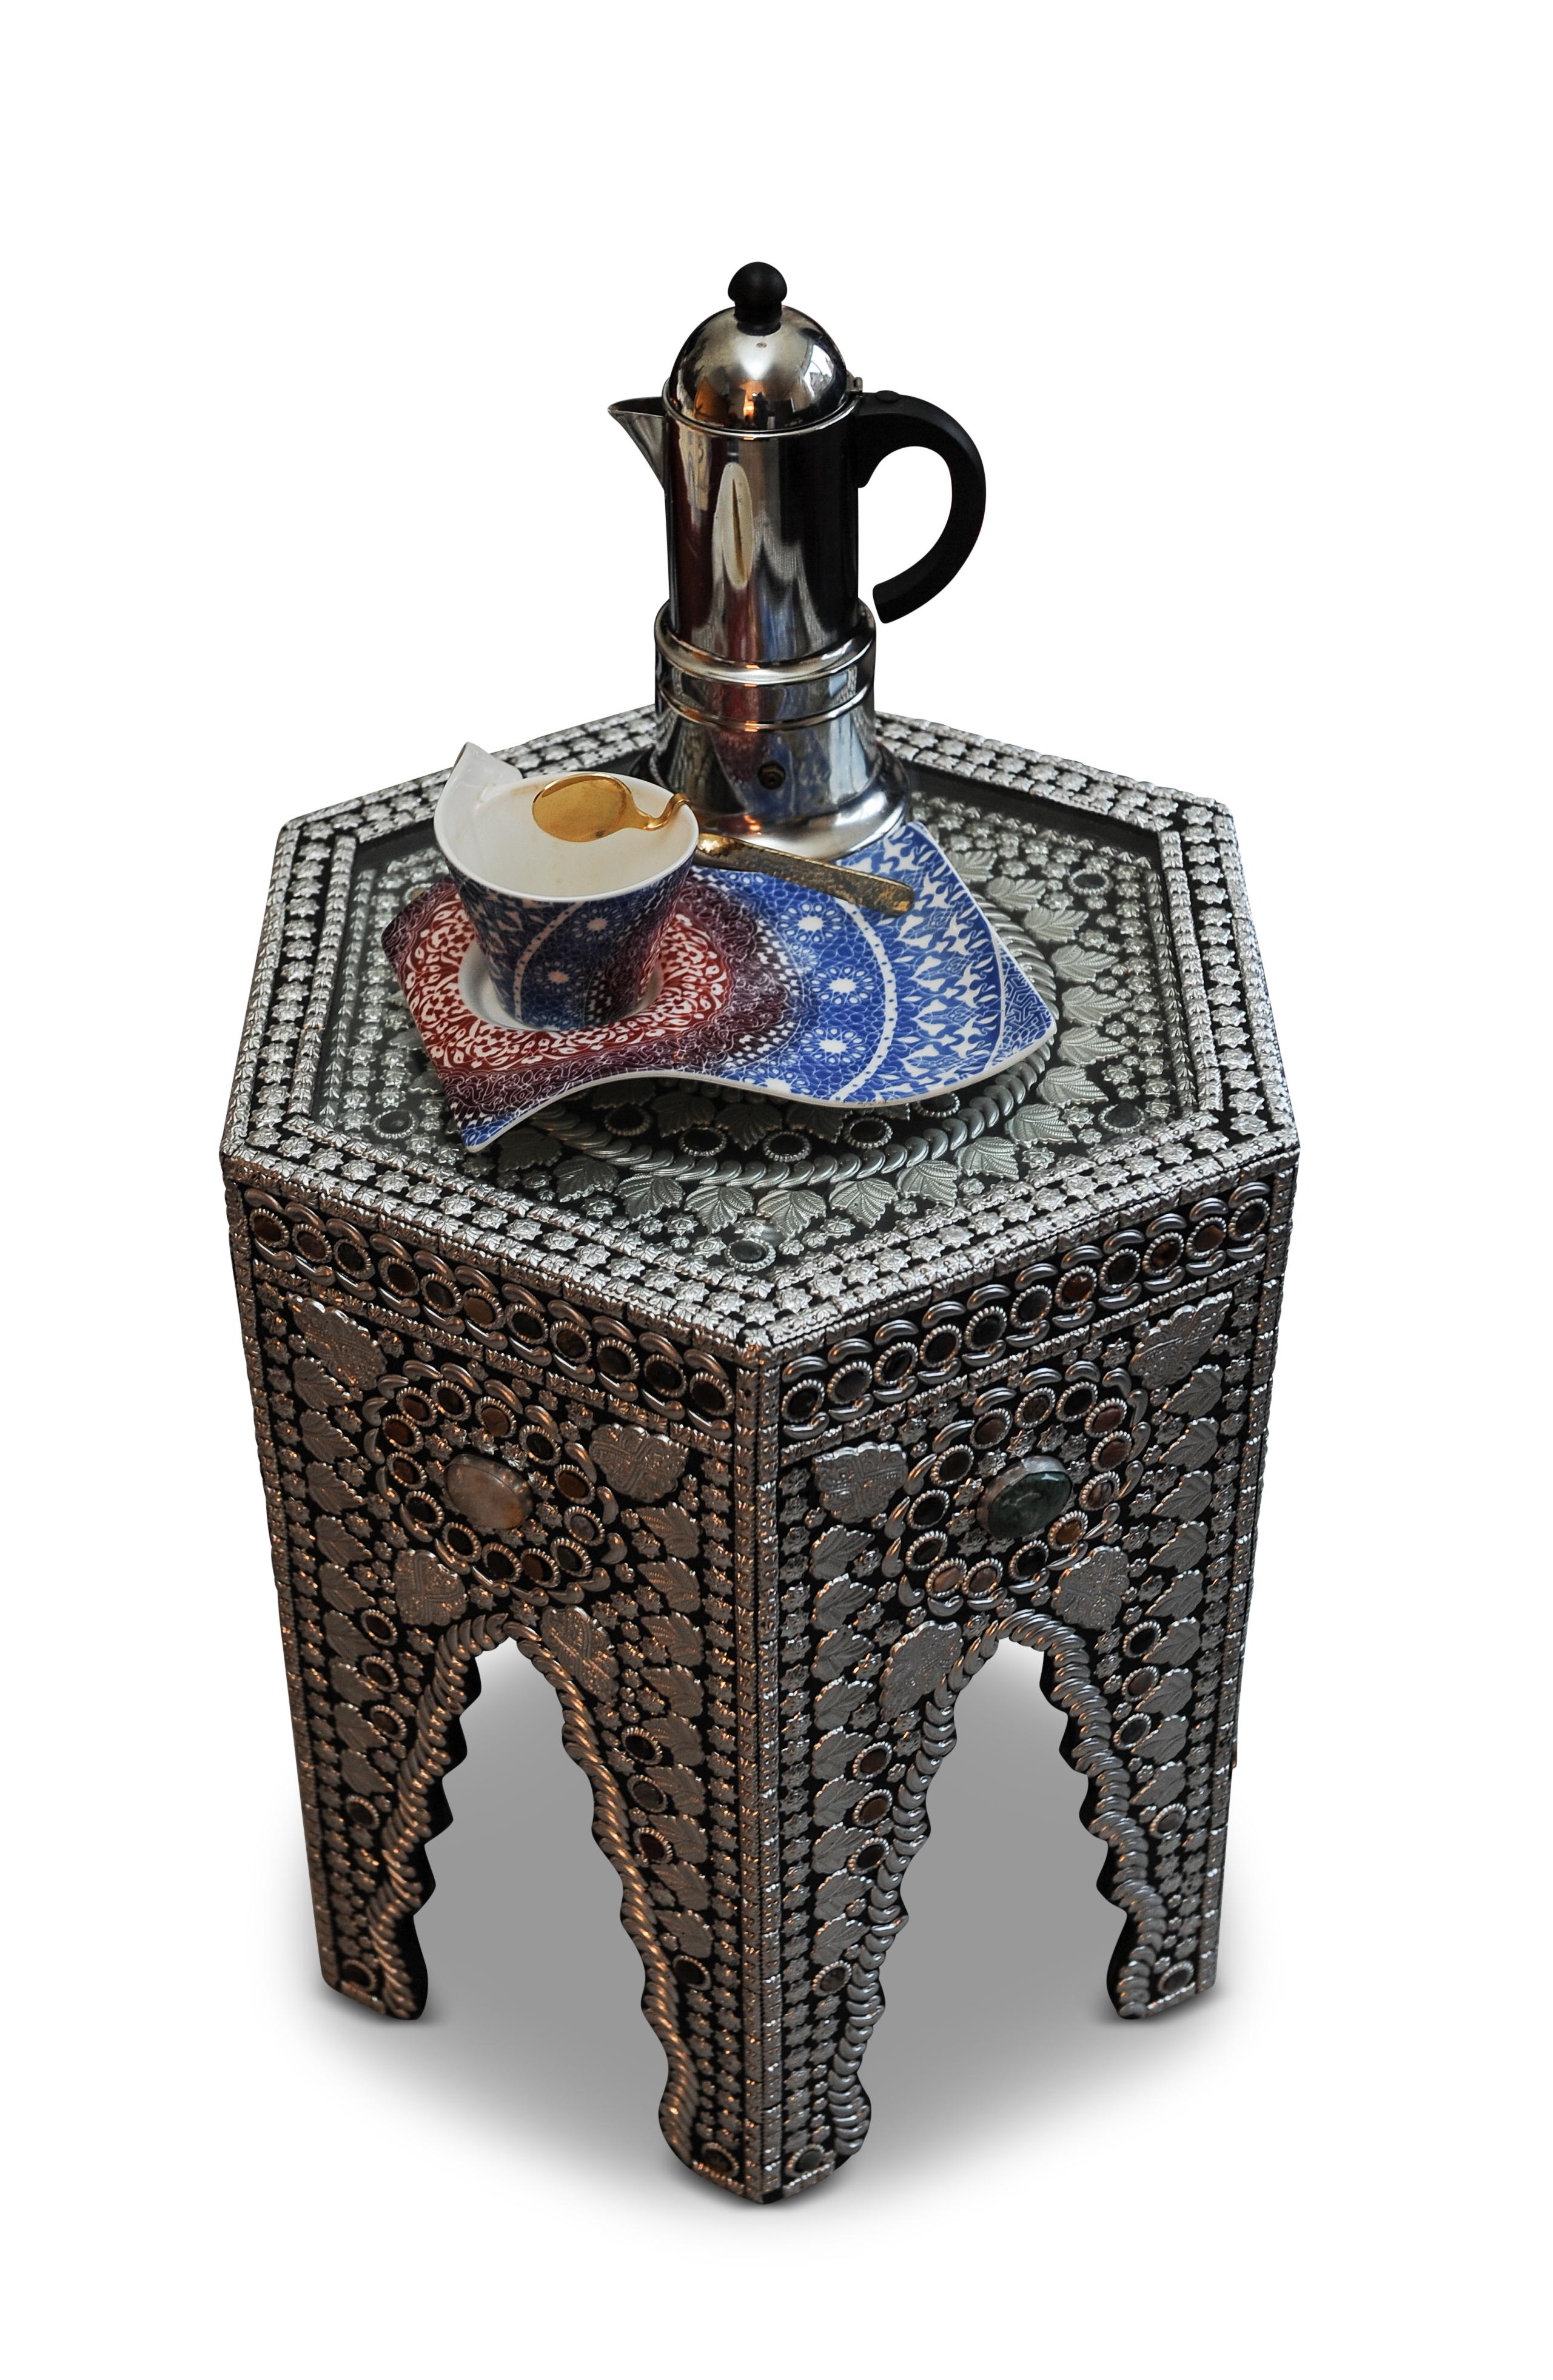 Handcrafted Moorish Design Decorative Hexagonal Glazed Coffee Table Mounted With Semi Precious Stones from Asia
